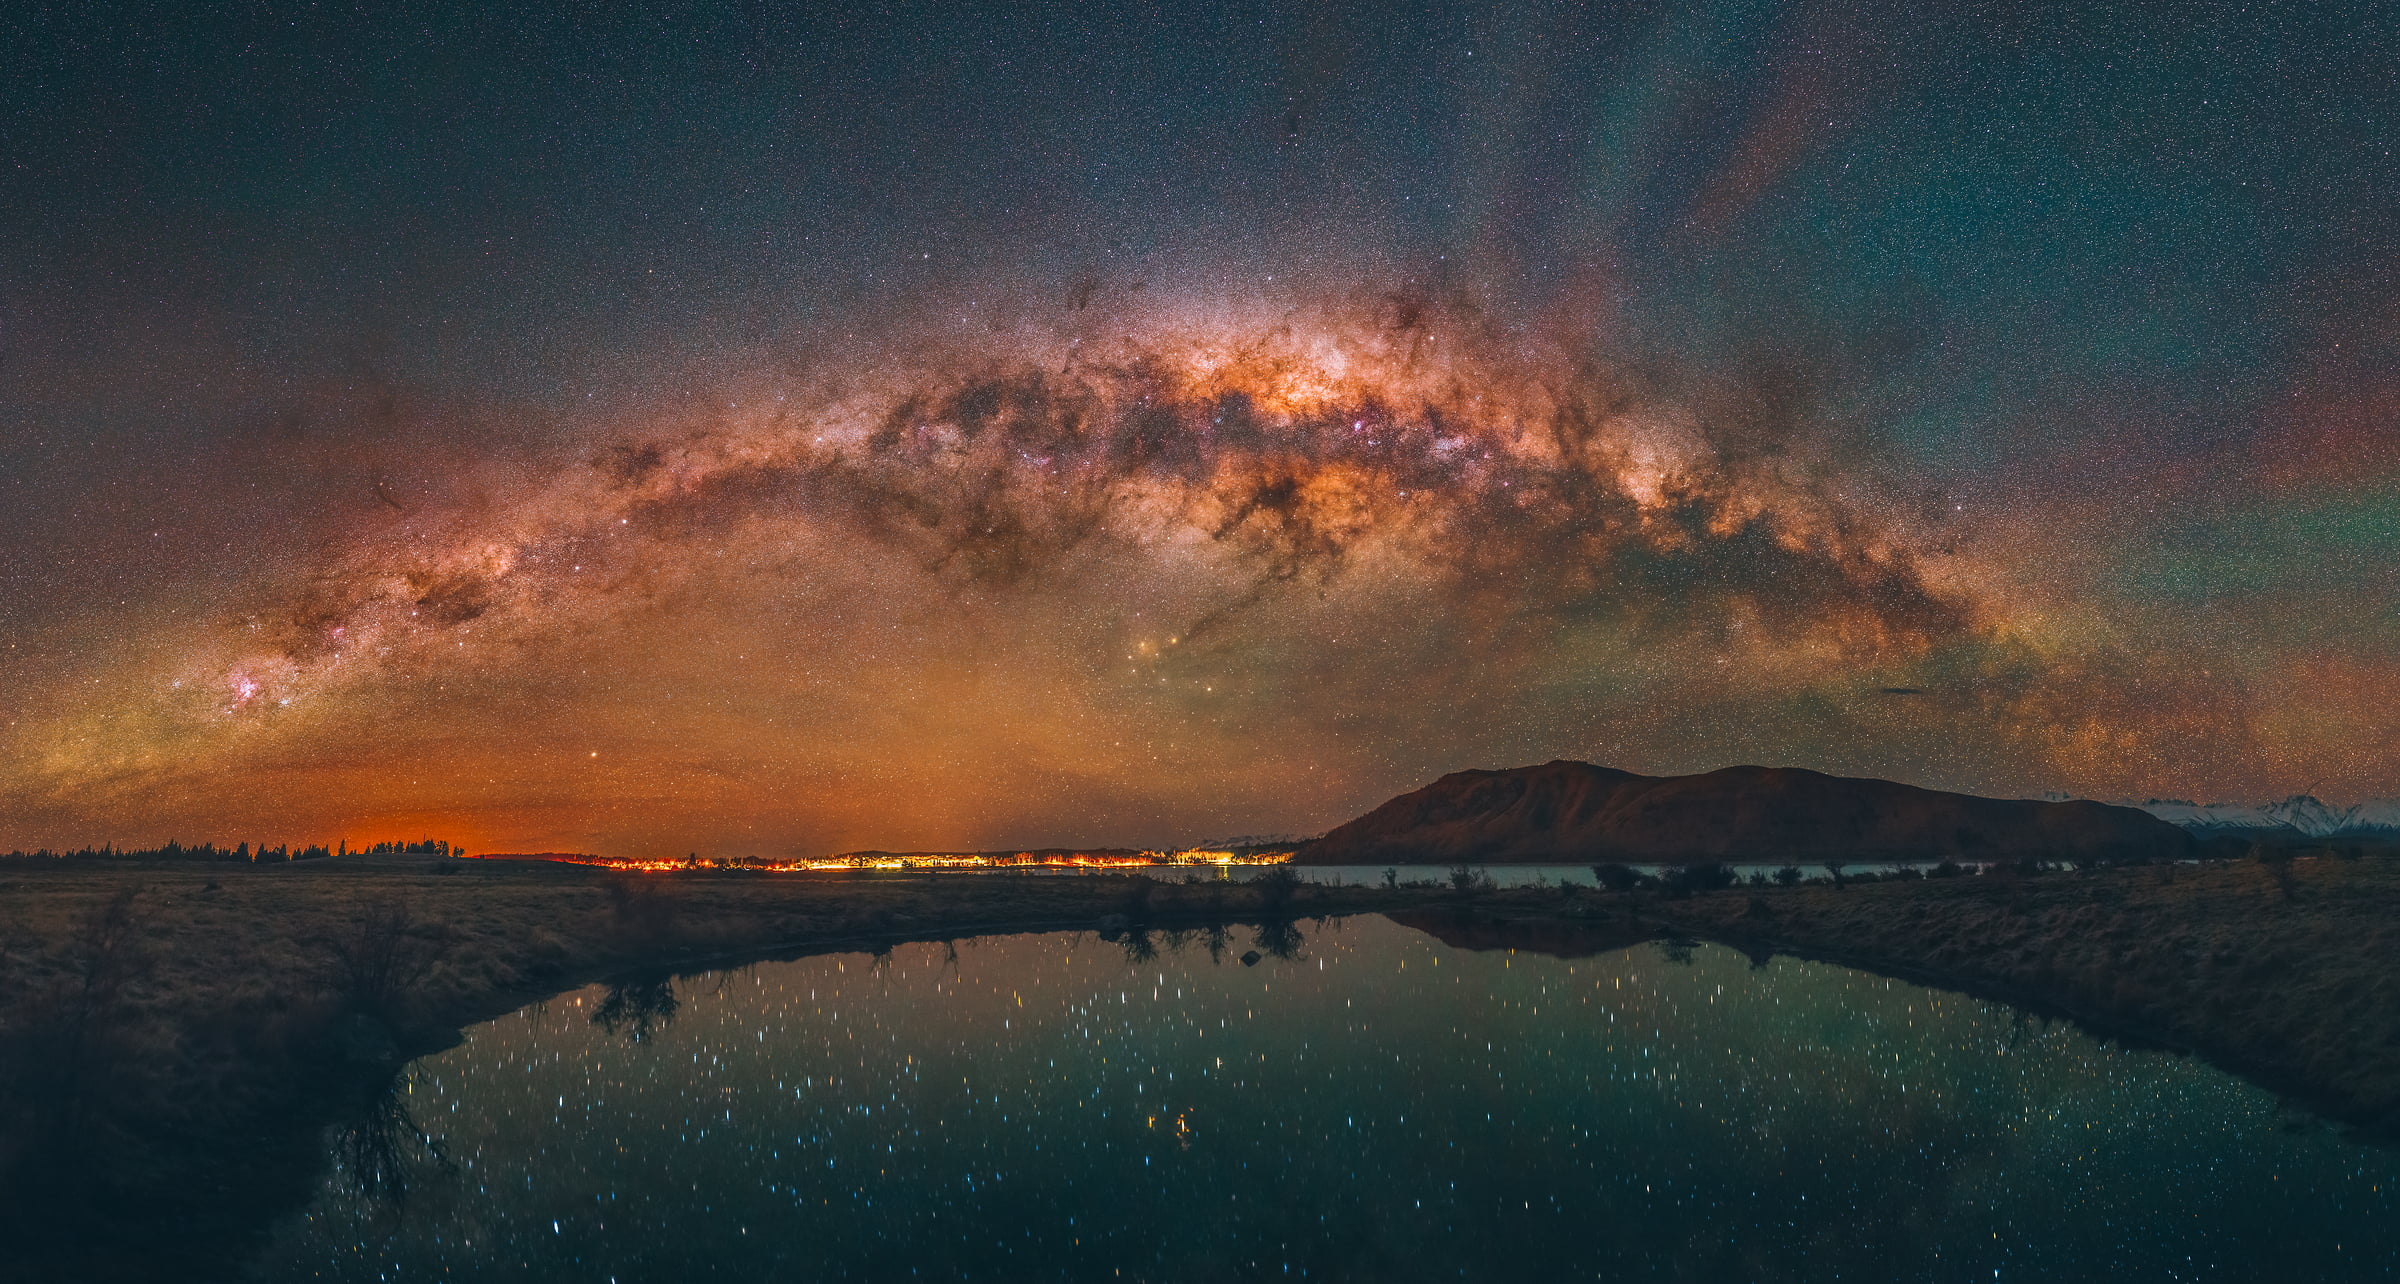 348 megapixels! A very high resolution, large-format VAST photo print of the night sky, milky way, and stars over mountains and a lake; fine art astrophotography landscape photo created by Paul Wilson in Lake Tekapo, New Zealand.